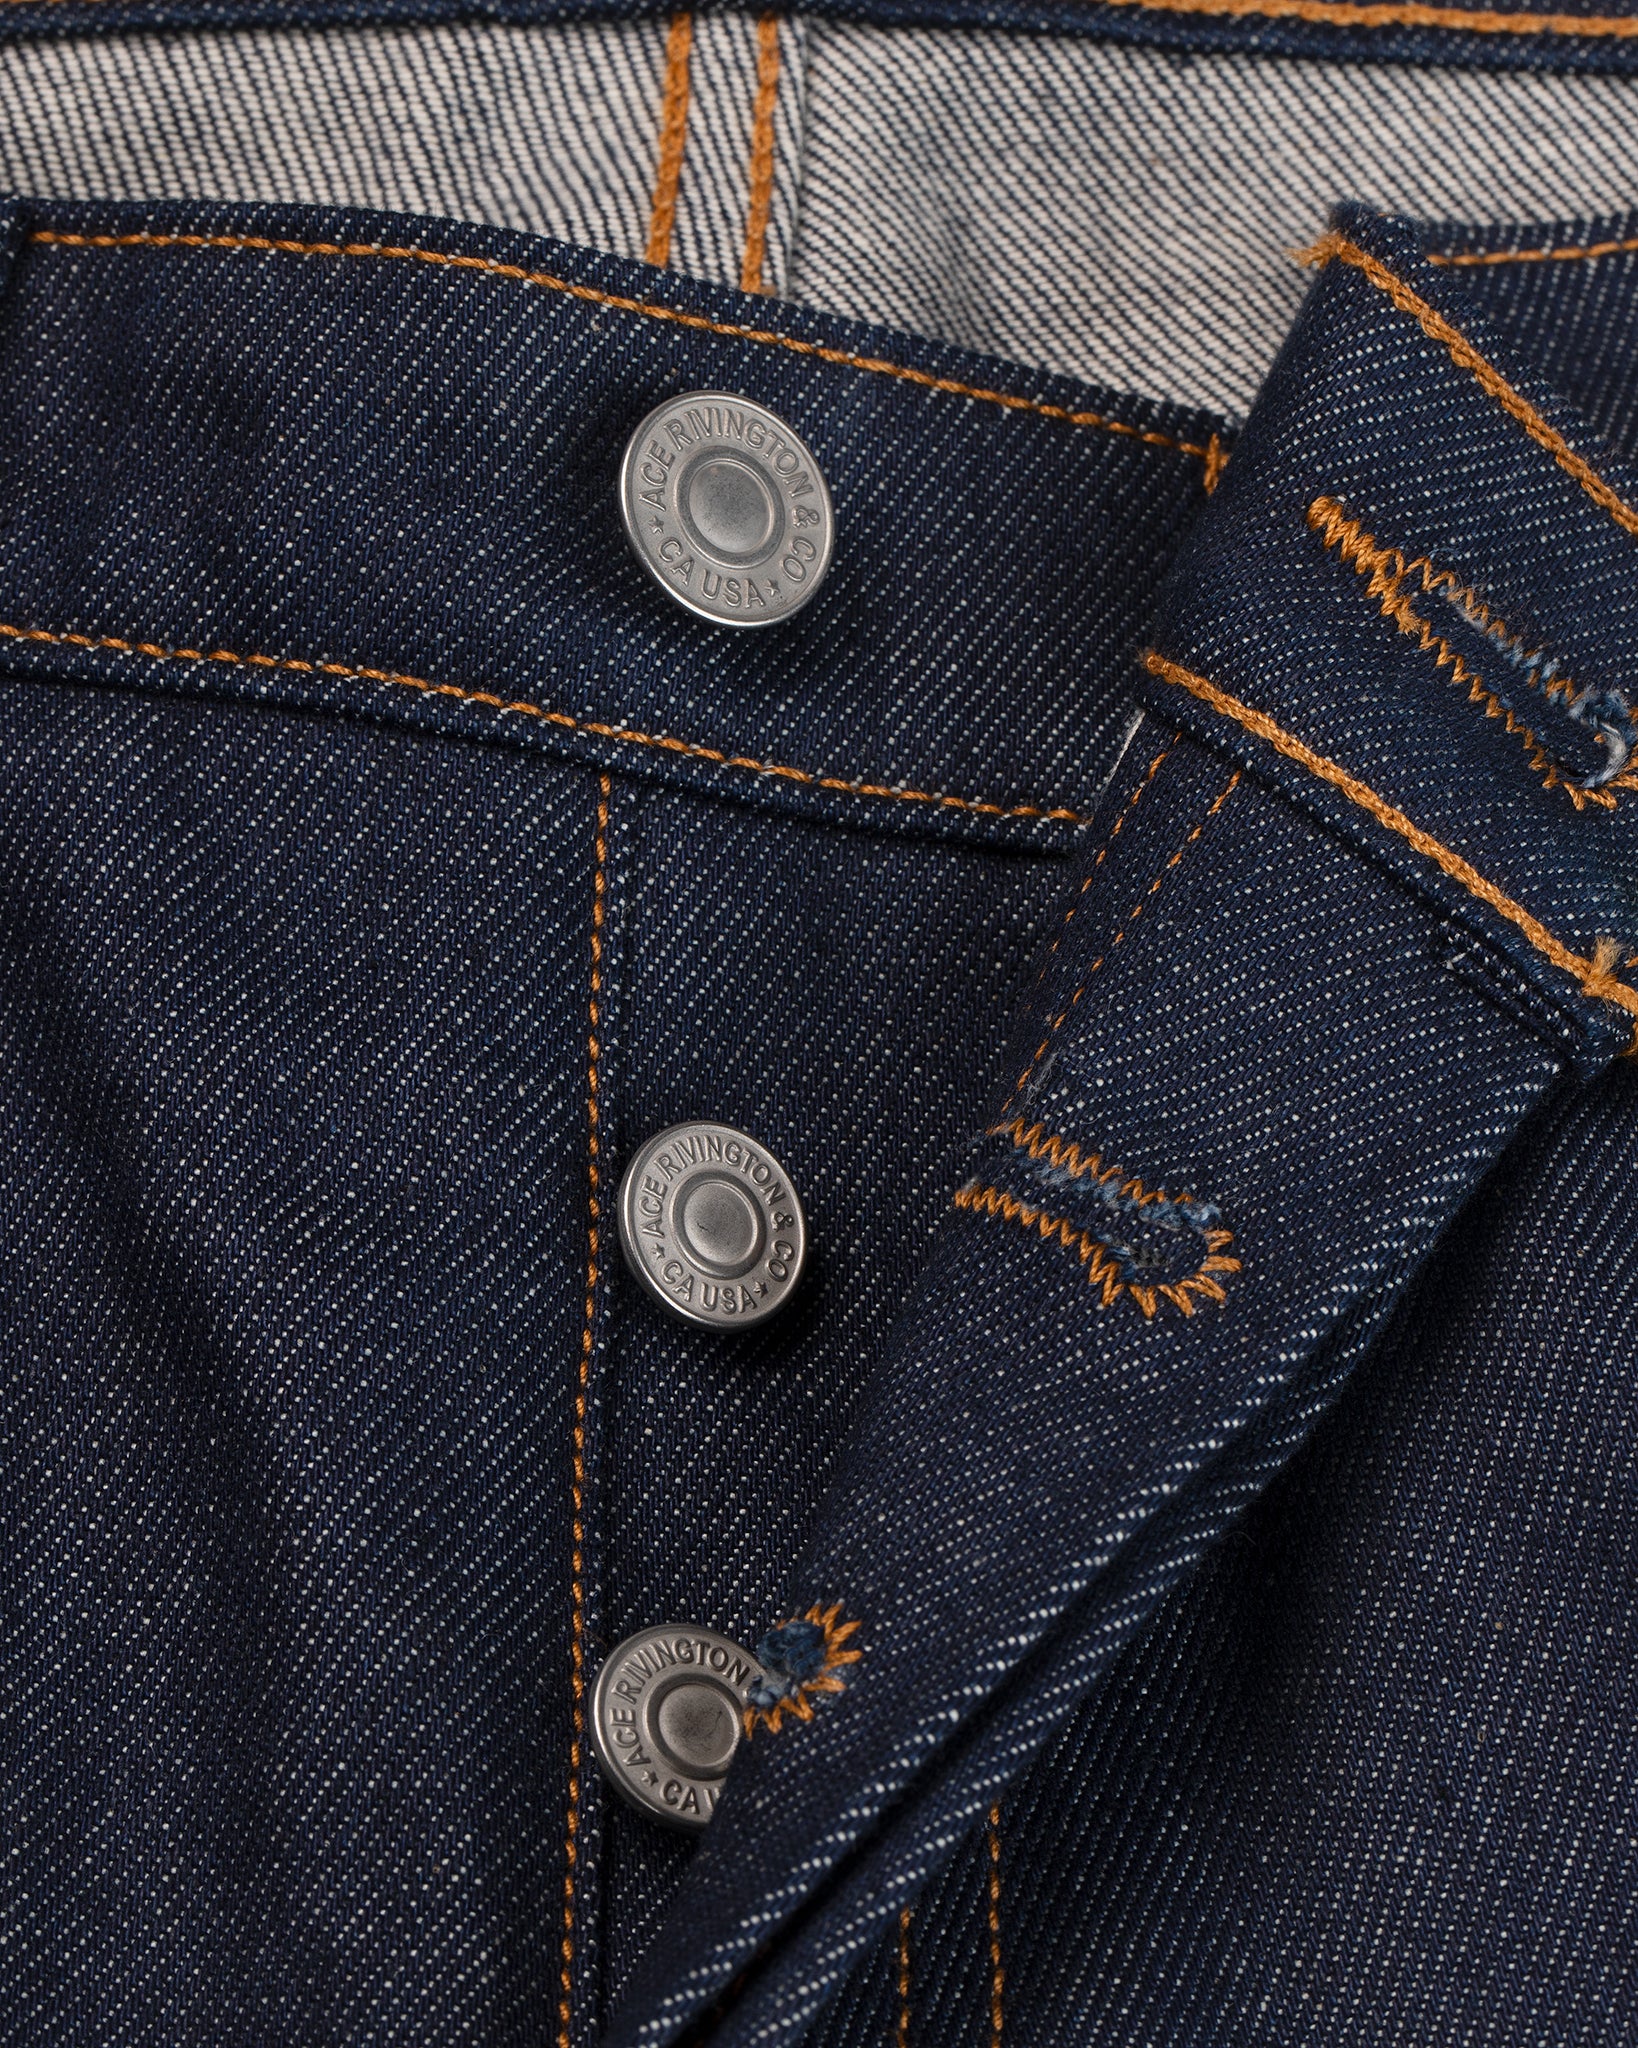 Discover more than 172 the limited denim best